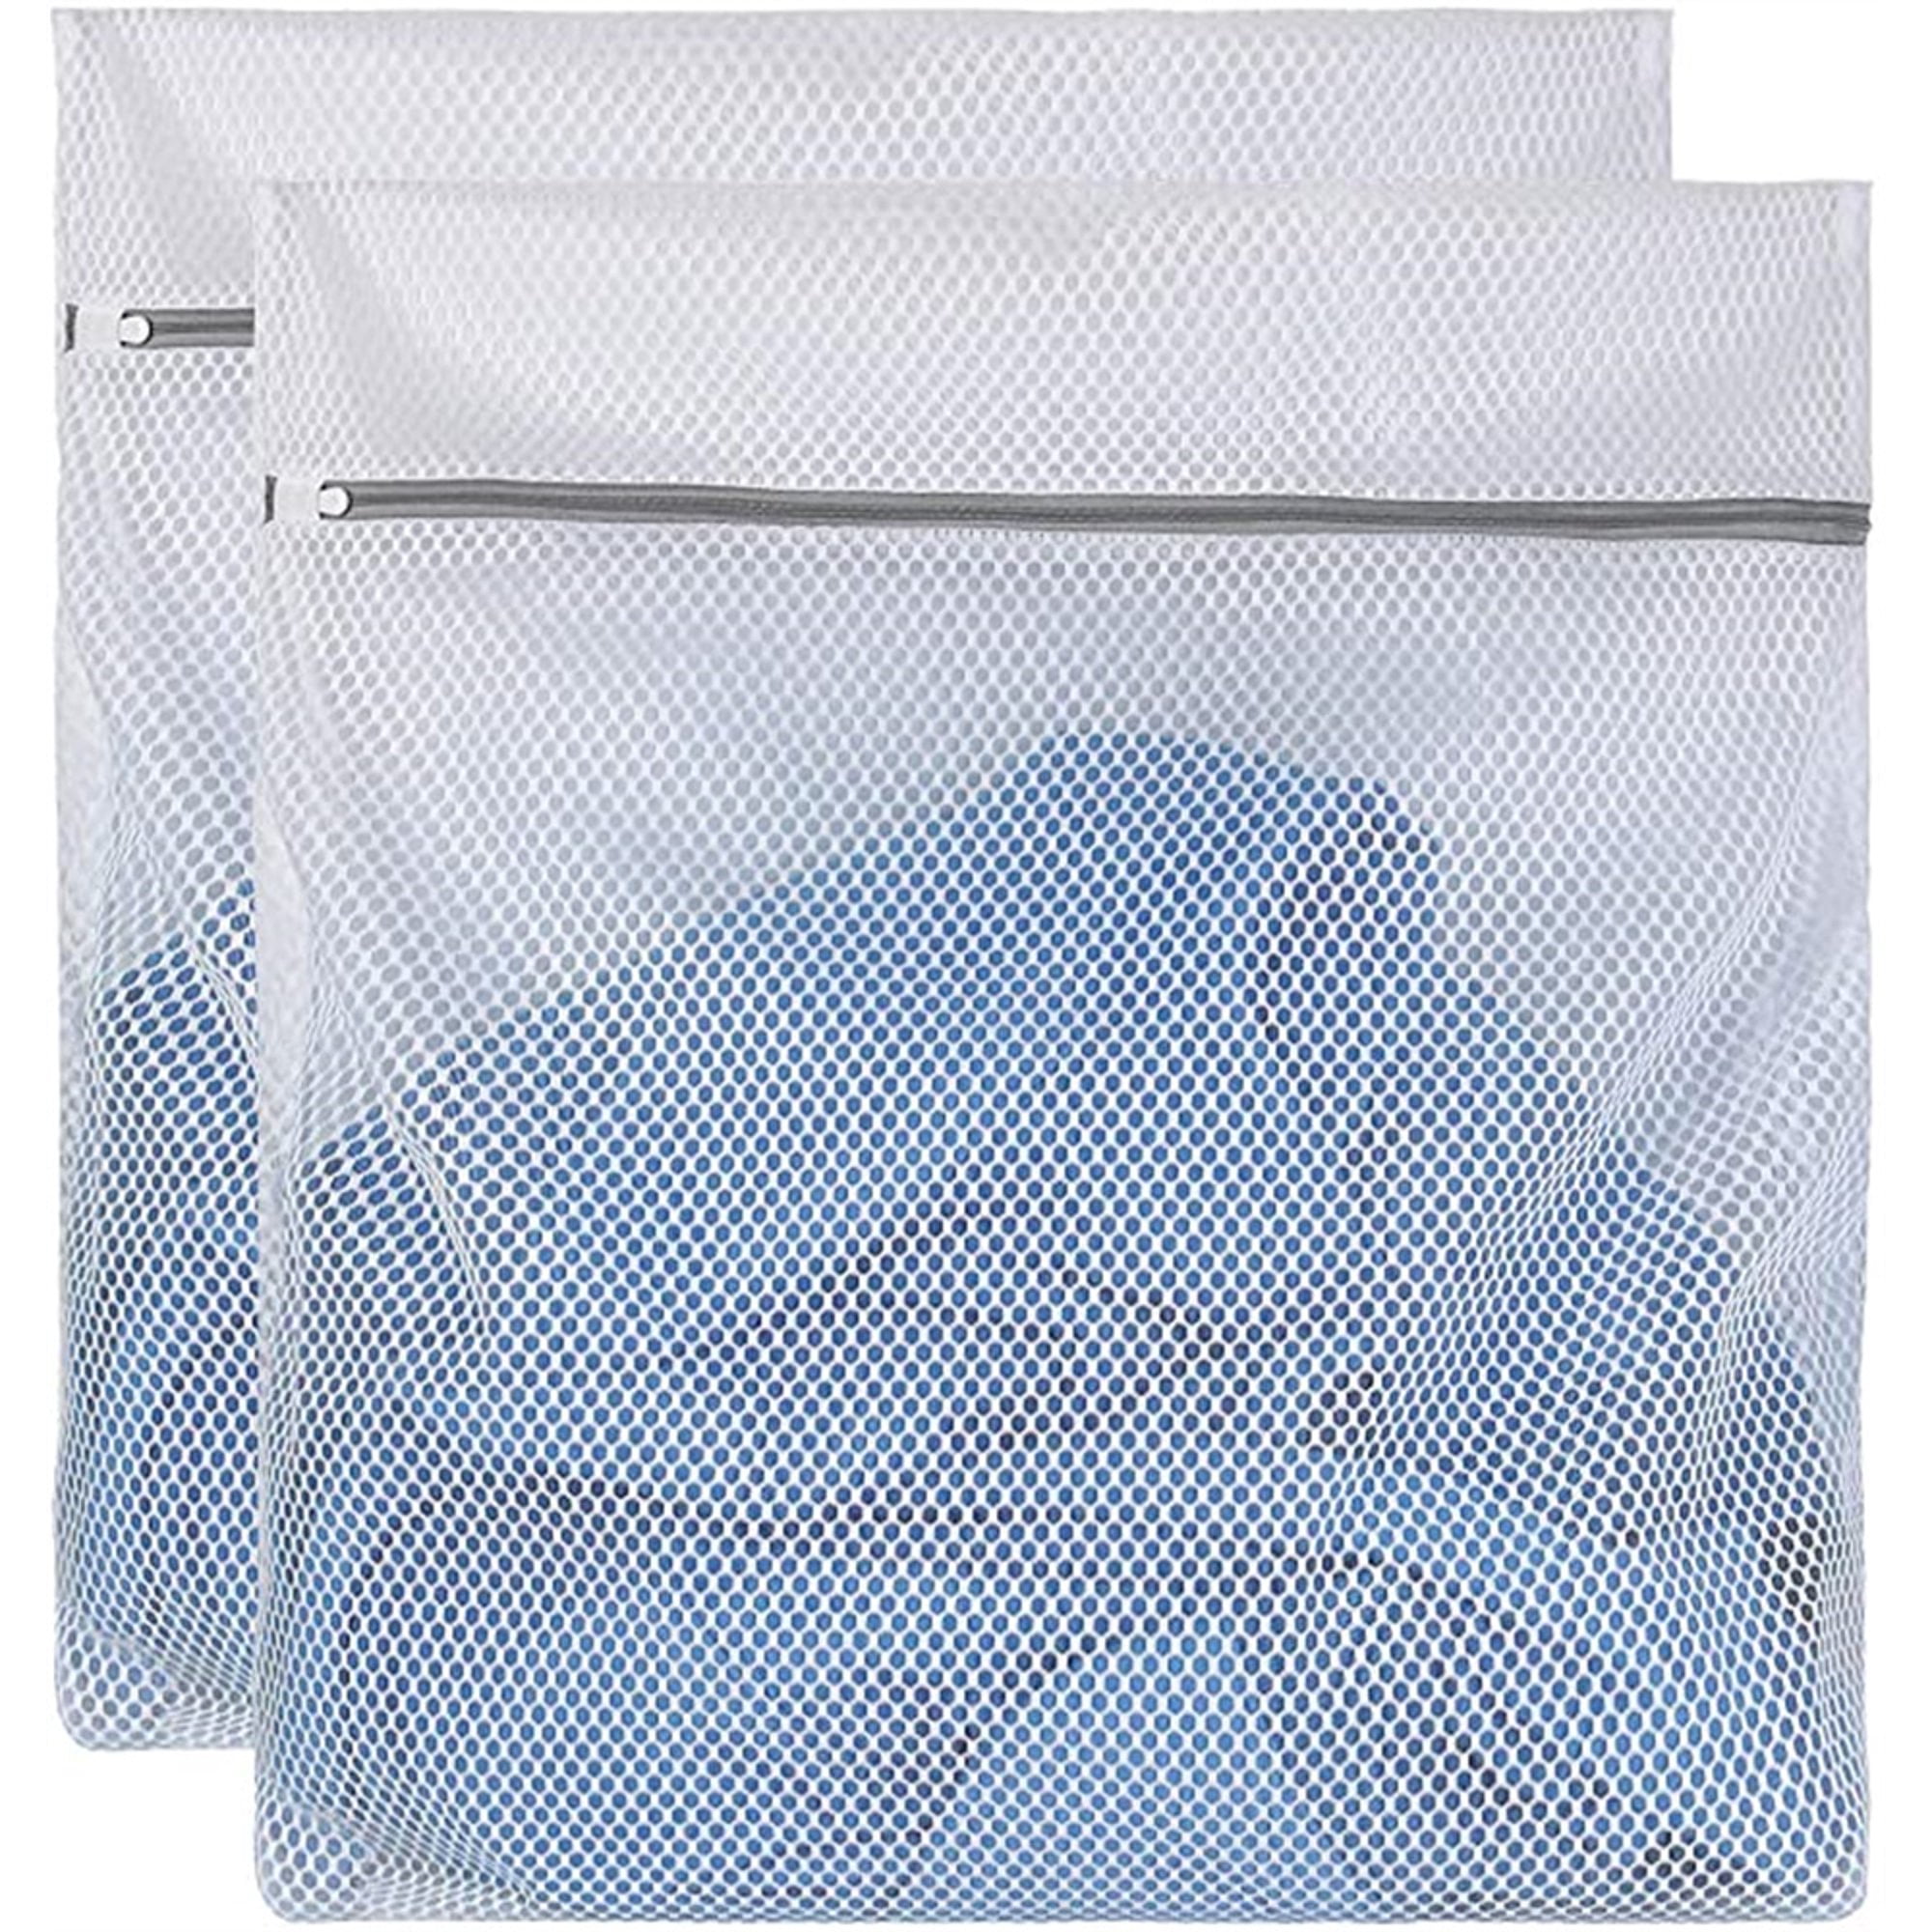 2 Pack Extra Large Heavy Duty Mesh Laundry Bag, 24*24in Travel Storage ...